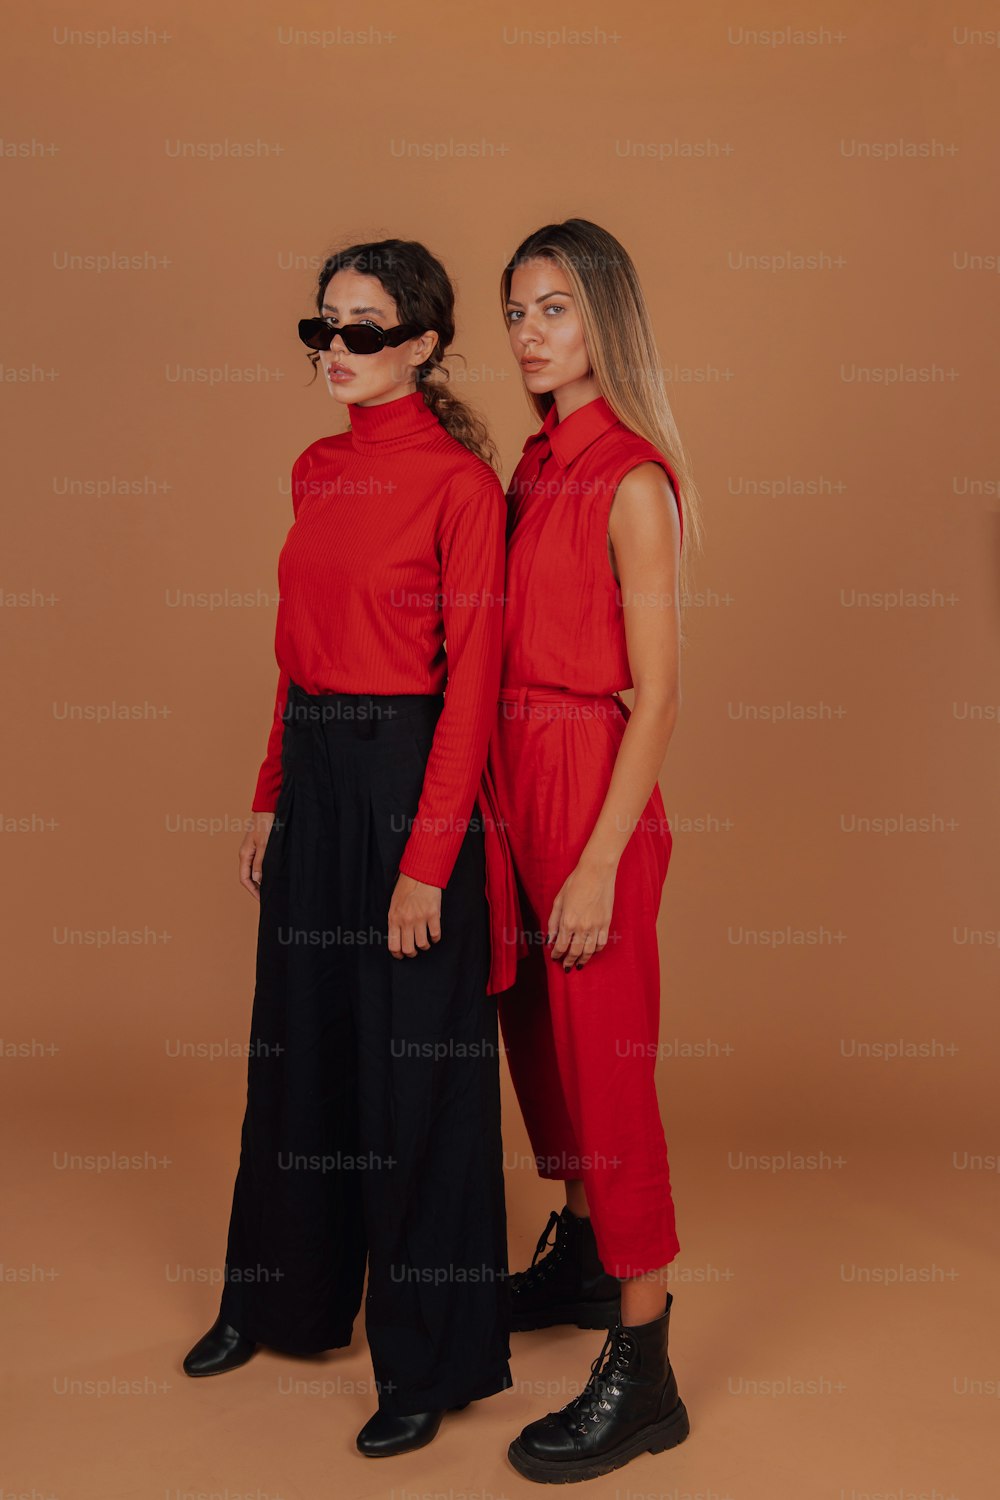 Women Clothing Pictures  Download Free Images on Unsplash